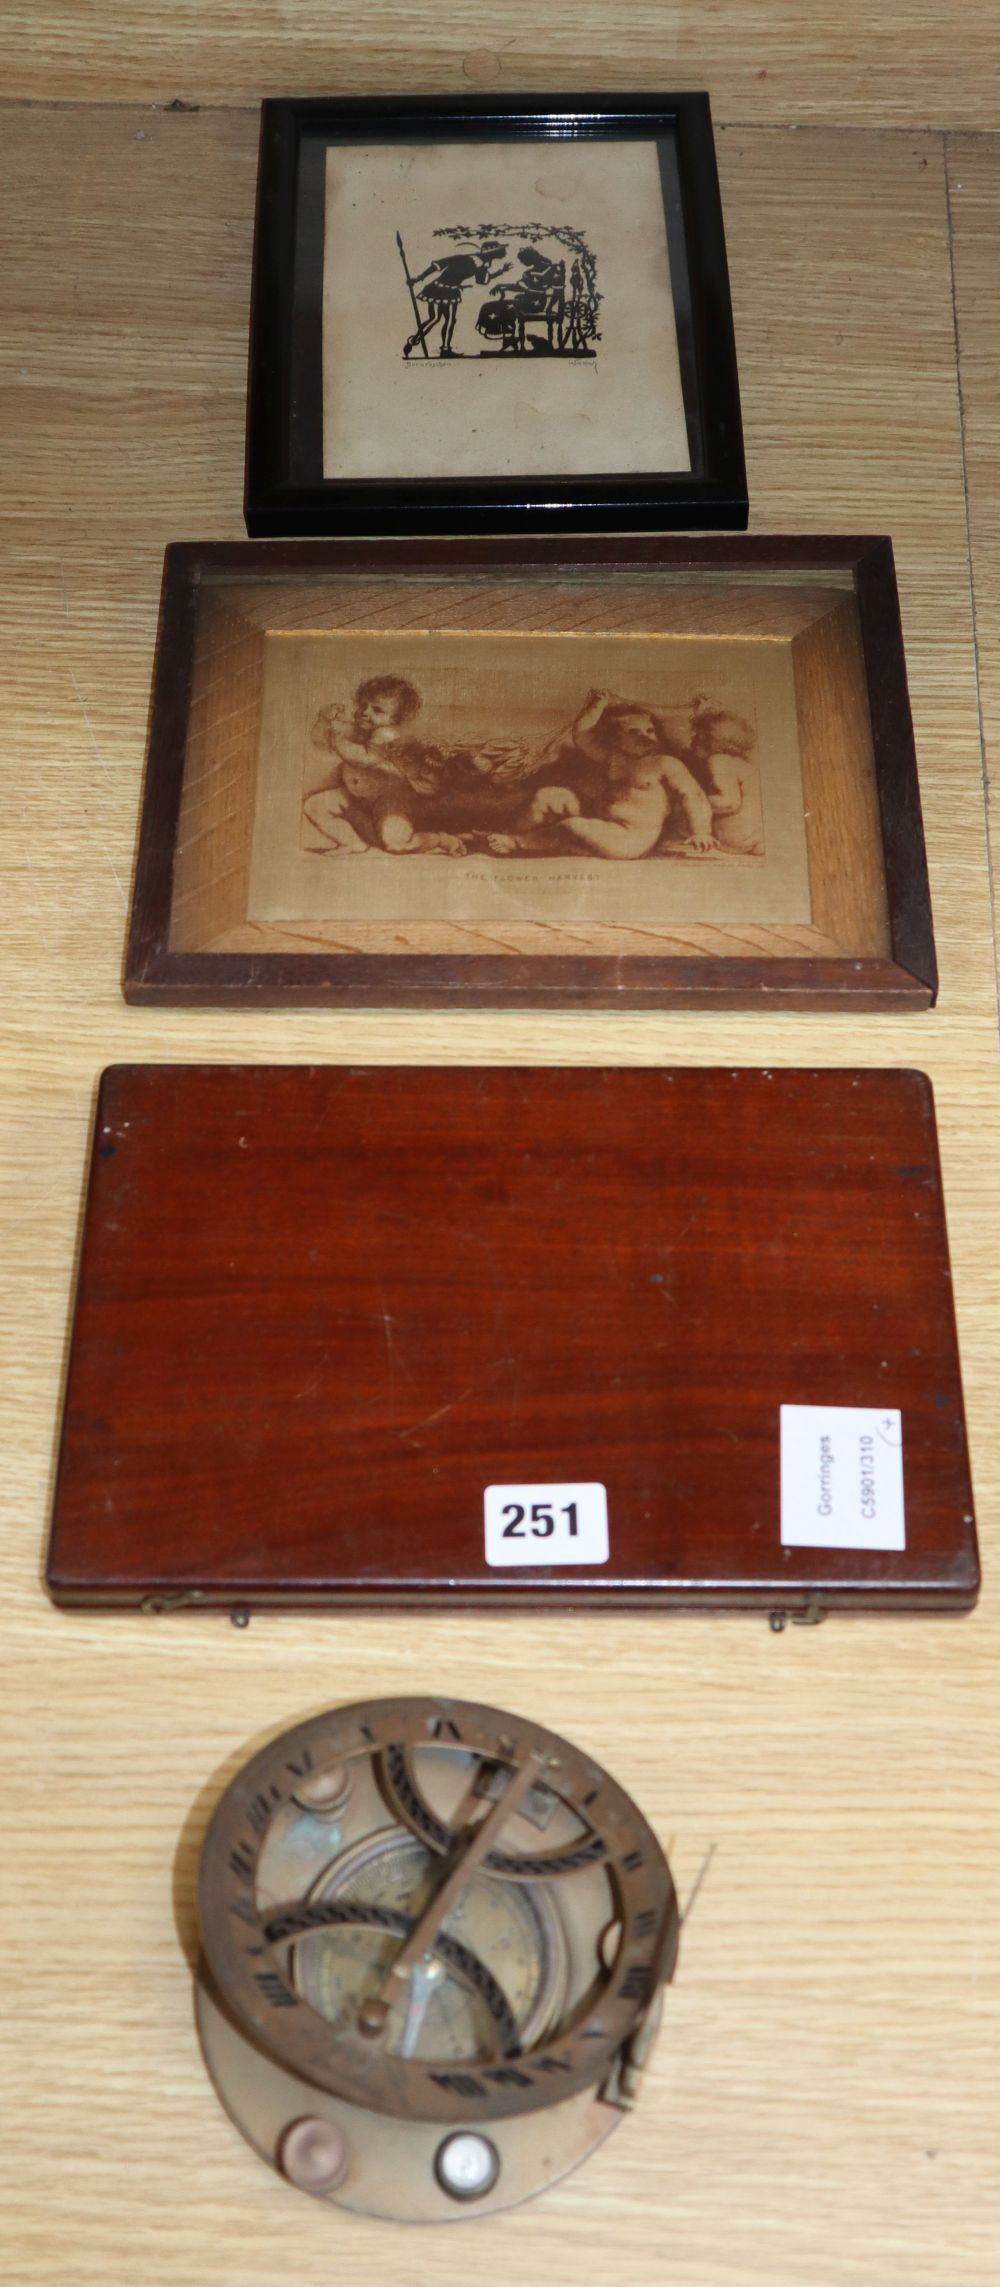 A West London compass / sundial, a cased Troughton & Simms protractor and two prints